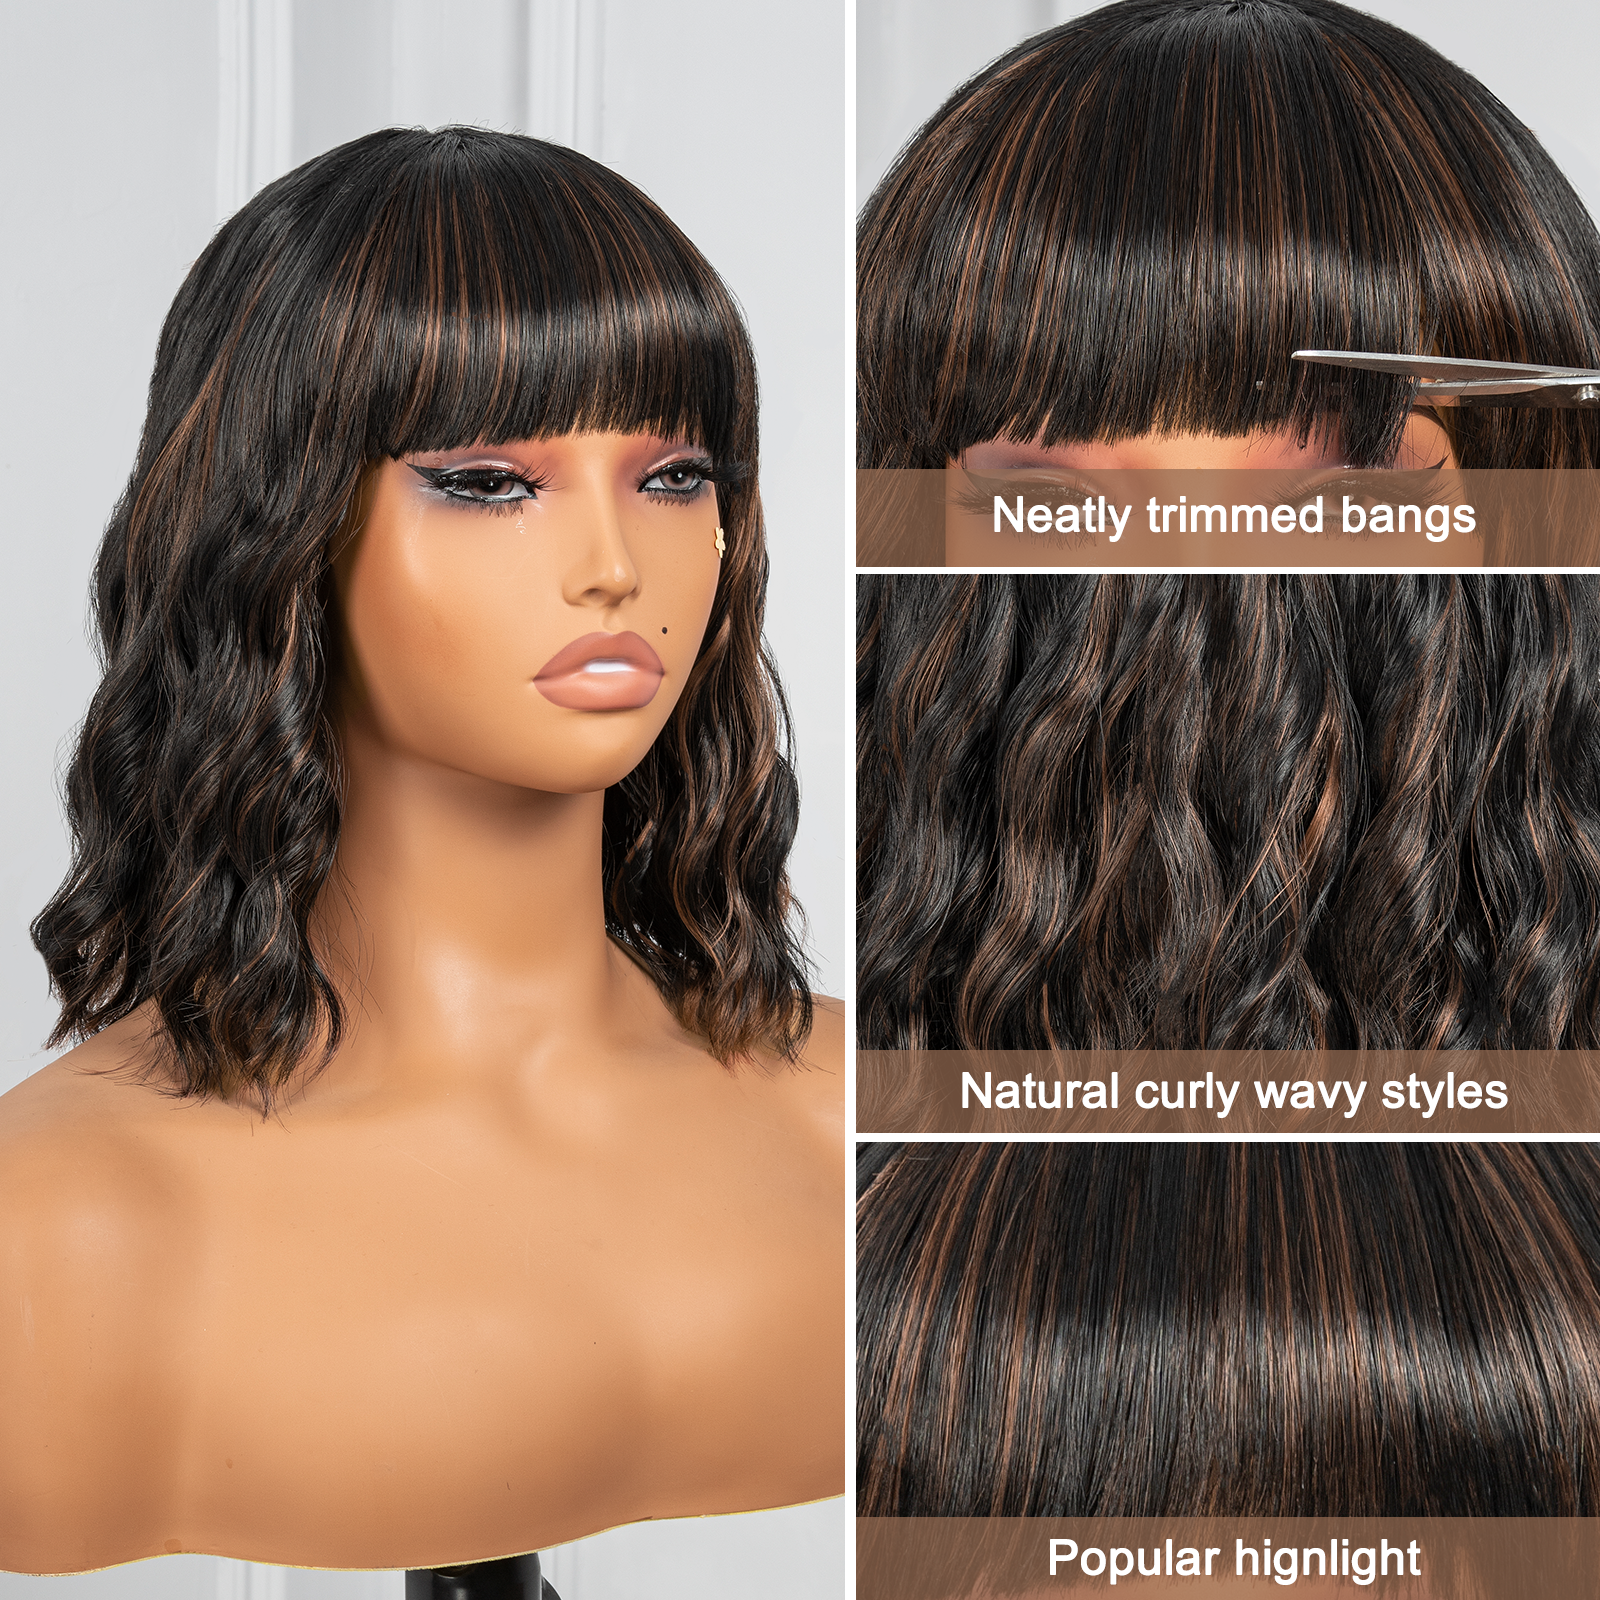 𝗣𝘂𝗺𝗽𝗸𝗶𝗻 𝗦𝗽𝗶𝗰𝗲 𝗧𝗿𝗲𝘀𝘀𝗲𝘀 | Toyotress Short Wavy Wigs With Bangs - 10 Inch Natural Black Bob Hair Wigs For Black Women, Shoulder Length Curly Synthetic Wigs(0925)